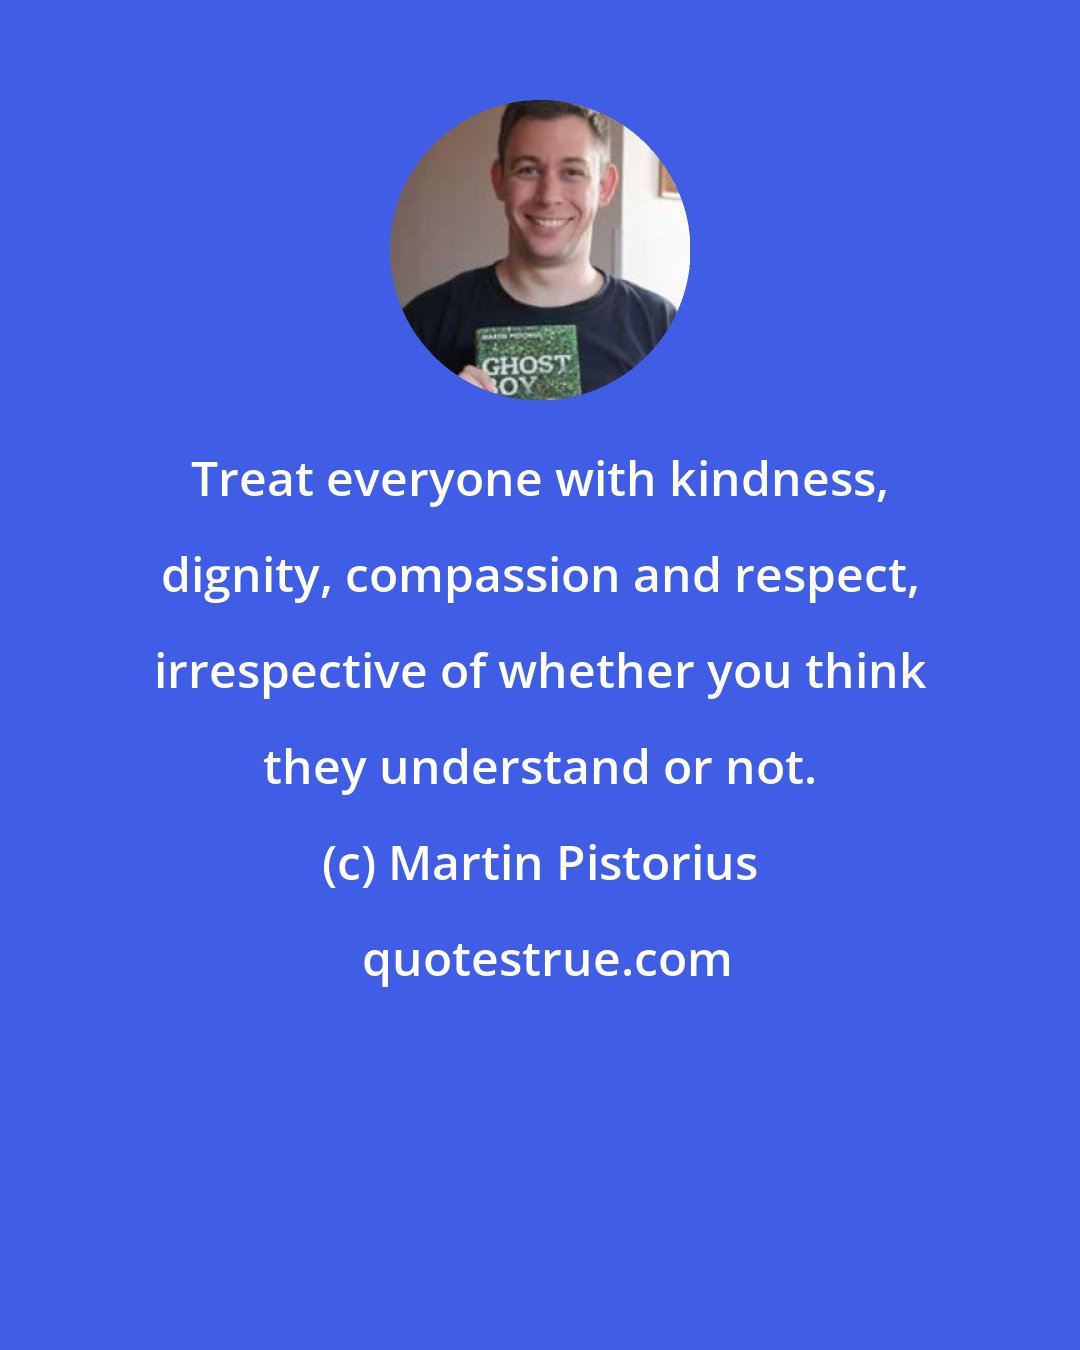 Martin Pistorius: Treat everyone with kindness, dignity, compassion and respect, irrespective of whether you think they understand or not.